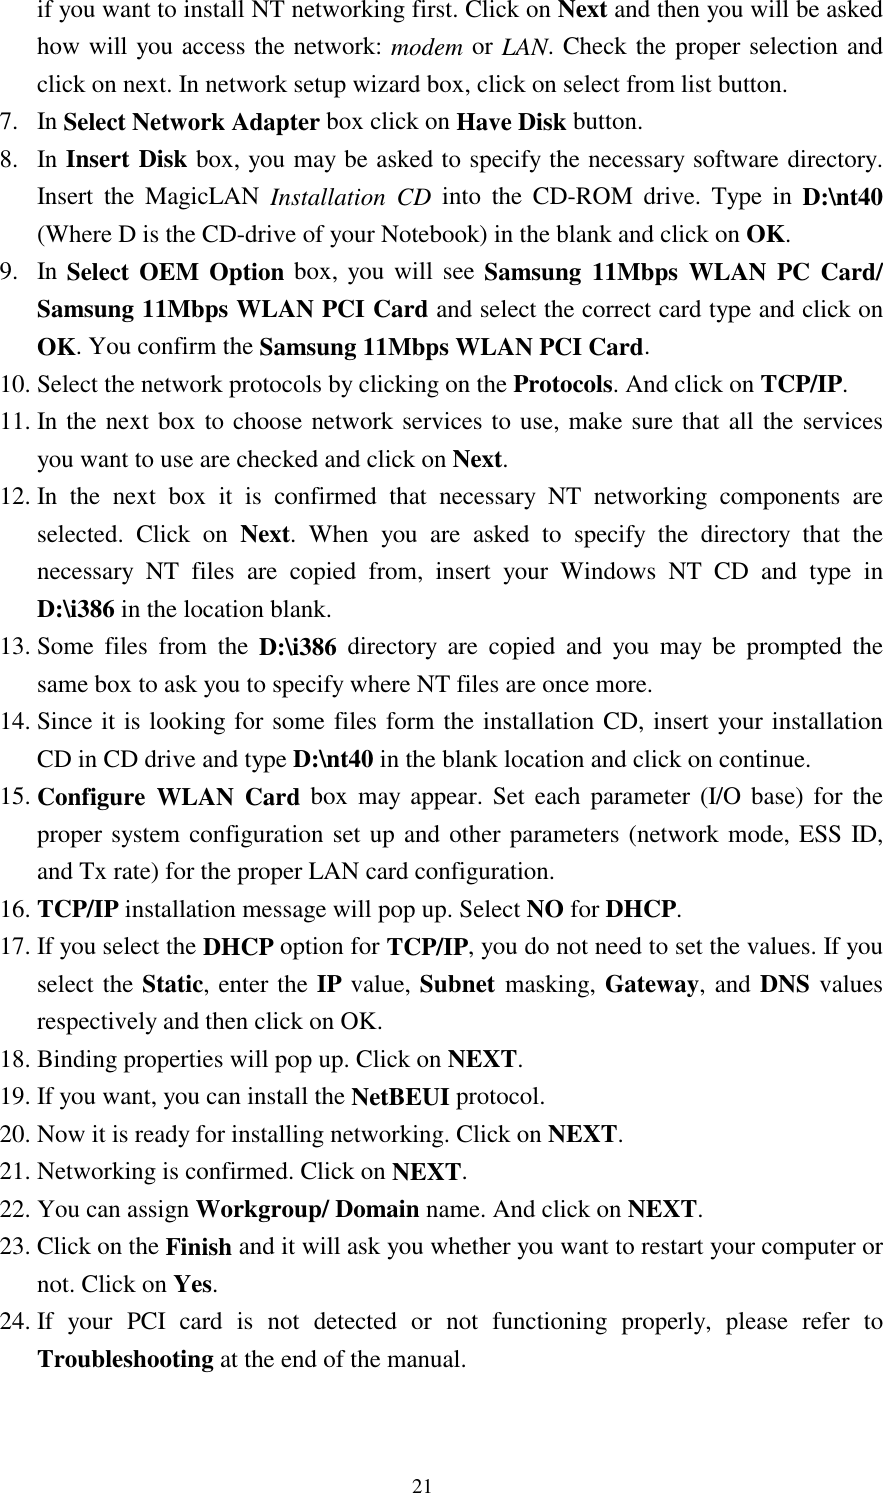  21 if you want to install NT networking first. Click on Next and then you will be asked how will you access the network: modem or LAN. Check the proper selection and click on next. In network setup wizard box, click on select from list button. 7. In Select Network Adapter box click on Have Disk button. 8. In Insert Disk box, you may be asked to specify the necessary software directory. Insert the MagicLAN Installation CD into the CD-ROM drive. Type in D:\nt40 (Where D is the CD-drive of your Notebook) in the blank and click on OK. 9. In Select OEM Option box, you will see Samsung 11Mbps WLAN PC Card/ Samsung 11Mbps WLAN PCI Card and select the correct card type and click on OK. You confirm the Samsung 11Mbps WLAN PCI Card. 10. Select the network protocols by clicking on the Protocols. And click on TCP/IP. 11. In the next box to choose network services to use, make sure that all the services you want to use are checked and click on Next. 12. In the next box it is confirmed that necessary NT networking components are selected. Click on Next. When you are asked to specify the directory that the necessary NT files are copied from, insert your Windows NT CD and type in D:\i386 in the location blank. 13. Some files from the D:\i386 directory are copied and you may be prompted the same box to ask you to specify where NT files are once more.  14. Since it is looking for some files form the installation CD, insert your installation CD in CD drive and type D:\nt40 in the blank location and click on continue. 15. Configure WLAN Card box may appear. Set each parameter (I/O base) for the proper system configuration set up and other parameters (network mode, ESS ID, and Tx rate) for the proper LAN card configuration.  16. TCP/IP installation message will pop up. Select NO for DHCP. 17. If you select the DHCP option for TCP/IP, you do not need to set the values. If you select the Static, enter the IP value, Subnet masking, Gateway, and DNS values respectively and then click on OK. 18. Binding properties will pop up. Click on NEXT. 19. If you want, you can install the NetBEUI protocol. 20. Now it is ready for installing networking. Click on NEXT. 21. Networking is confirmed. Click on NEXT. 22. You can assign Workgroup/ Domain name. And click on NEXT. 23. Click on the Finish and it will ask you whether you want to restart your computer or      not. Click on Yes.  24. If your PCI card is not detected or not functioning properly, please refer to      Troubleshooting at the end of the manual.   